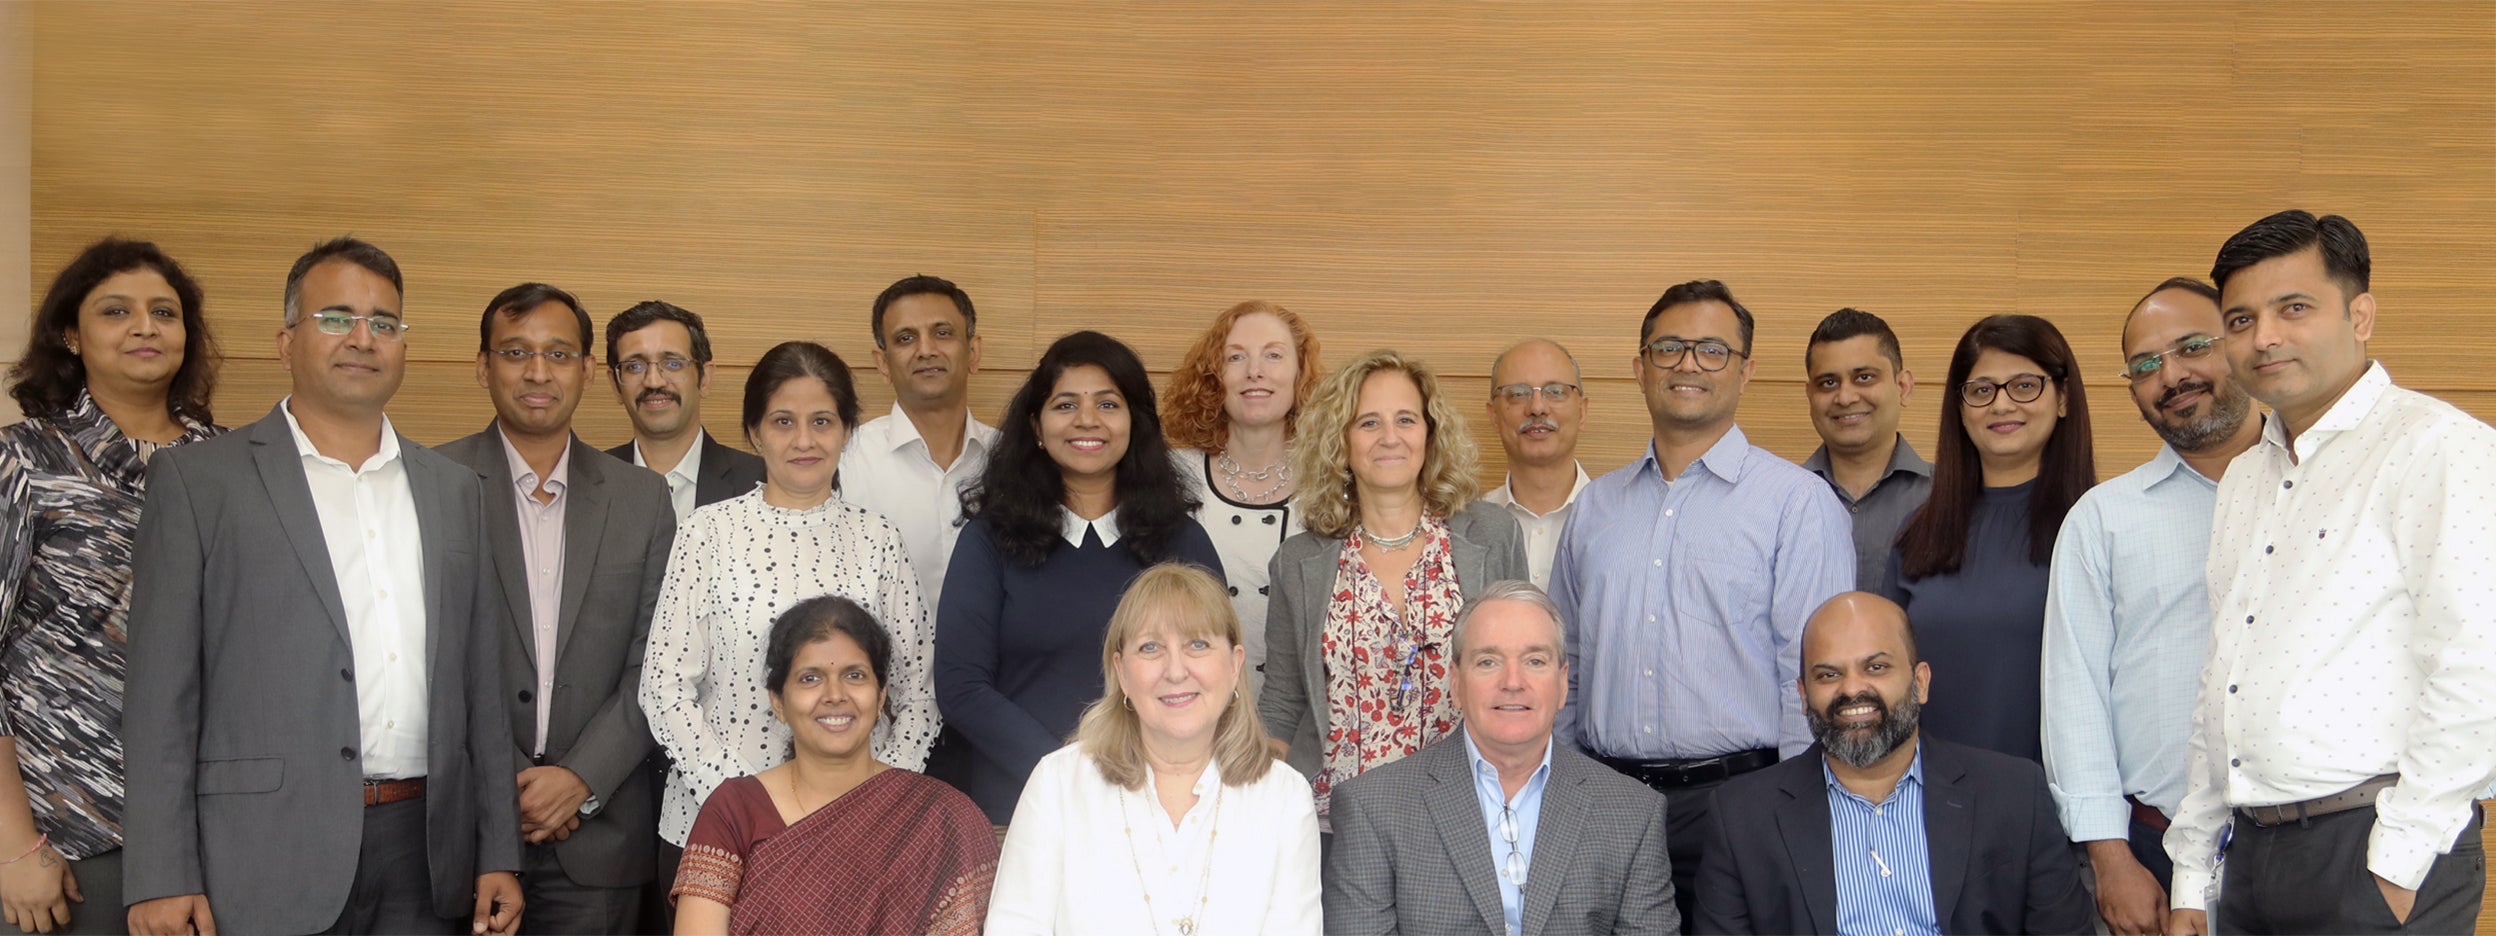 Invesco executives and employees in India